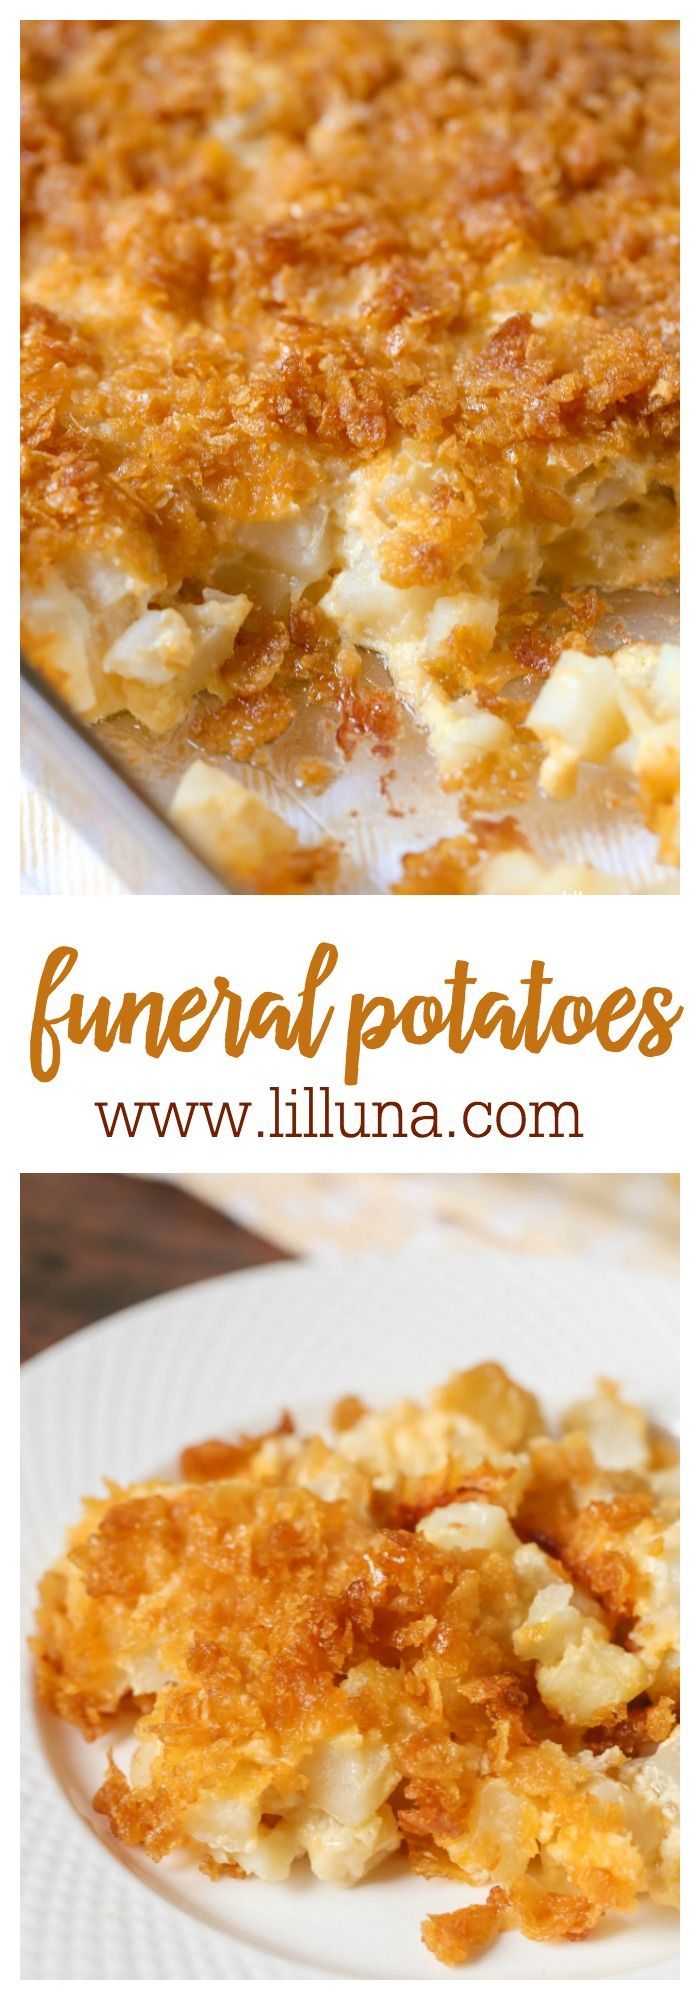 Our all-time favorite side dish – Cheesy Potato Casserole aka Funeral Potatoes. In